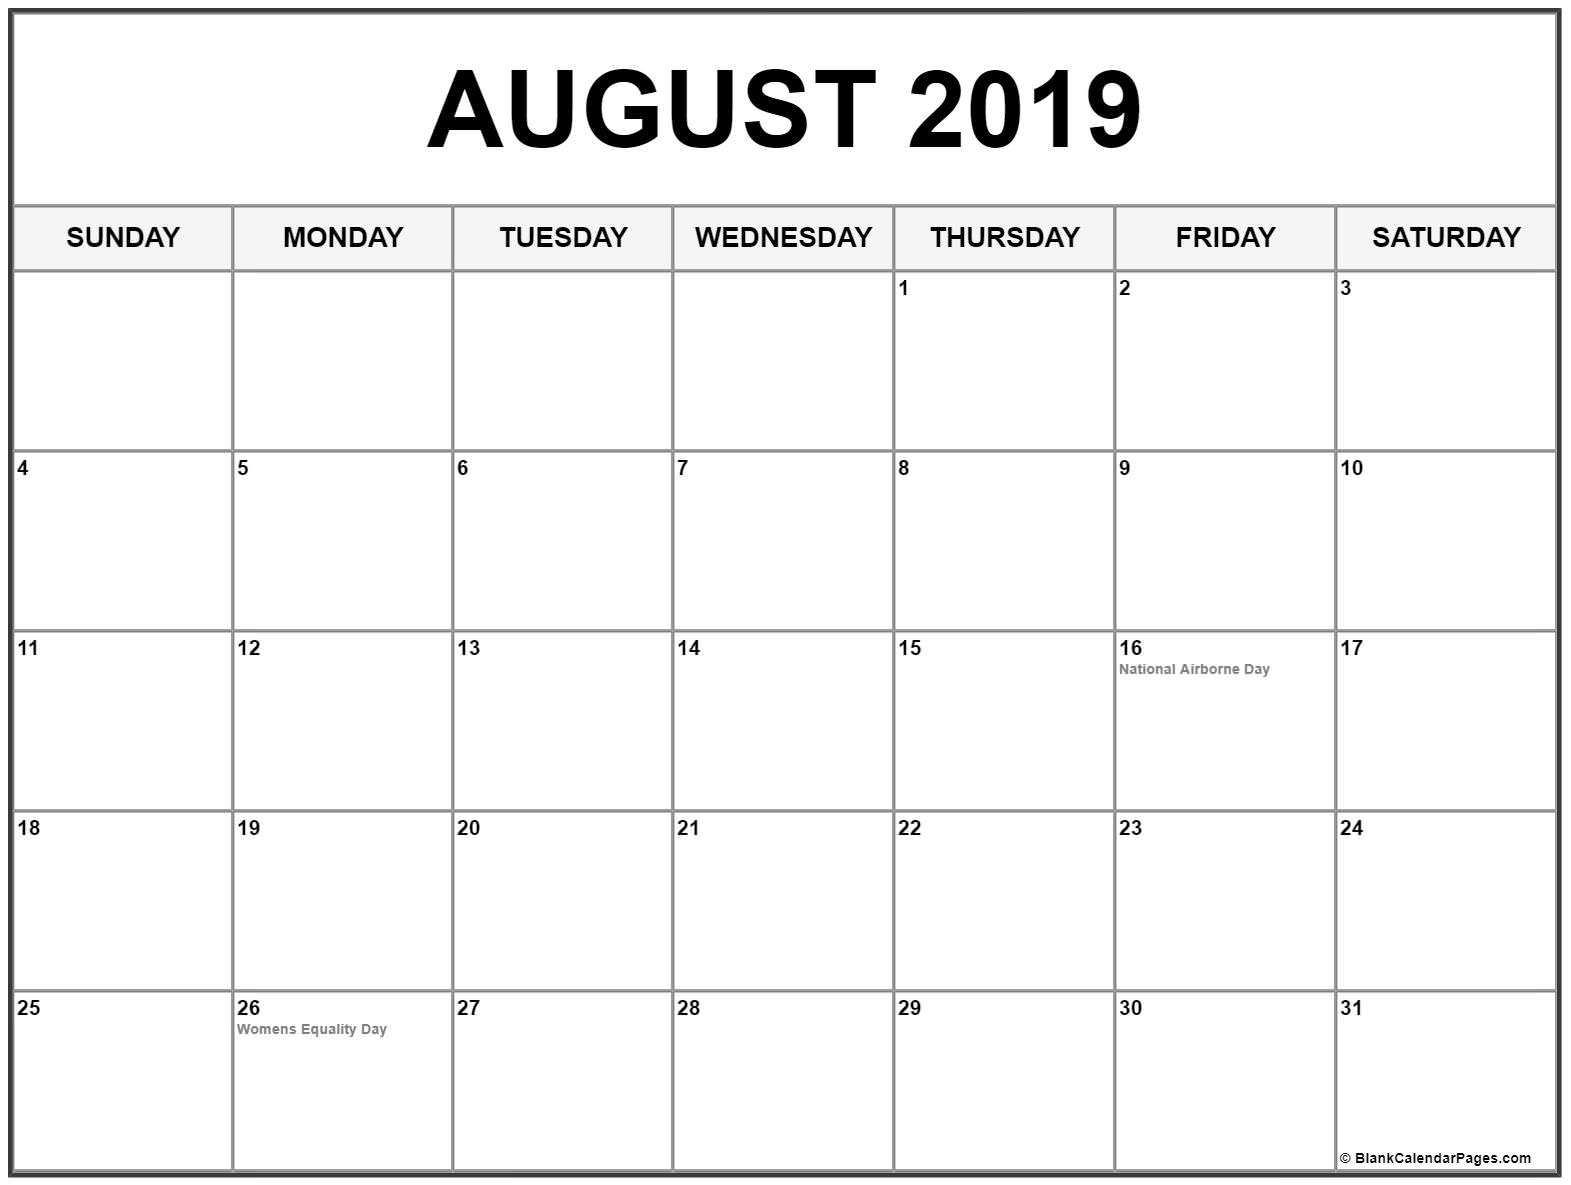 Collection Of August 2019 Calendars With Holidays Calendar Holidays For August